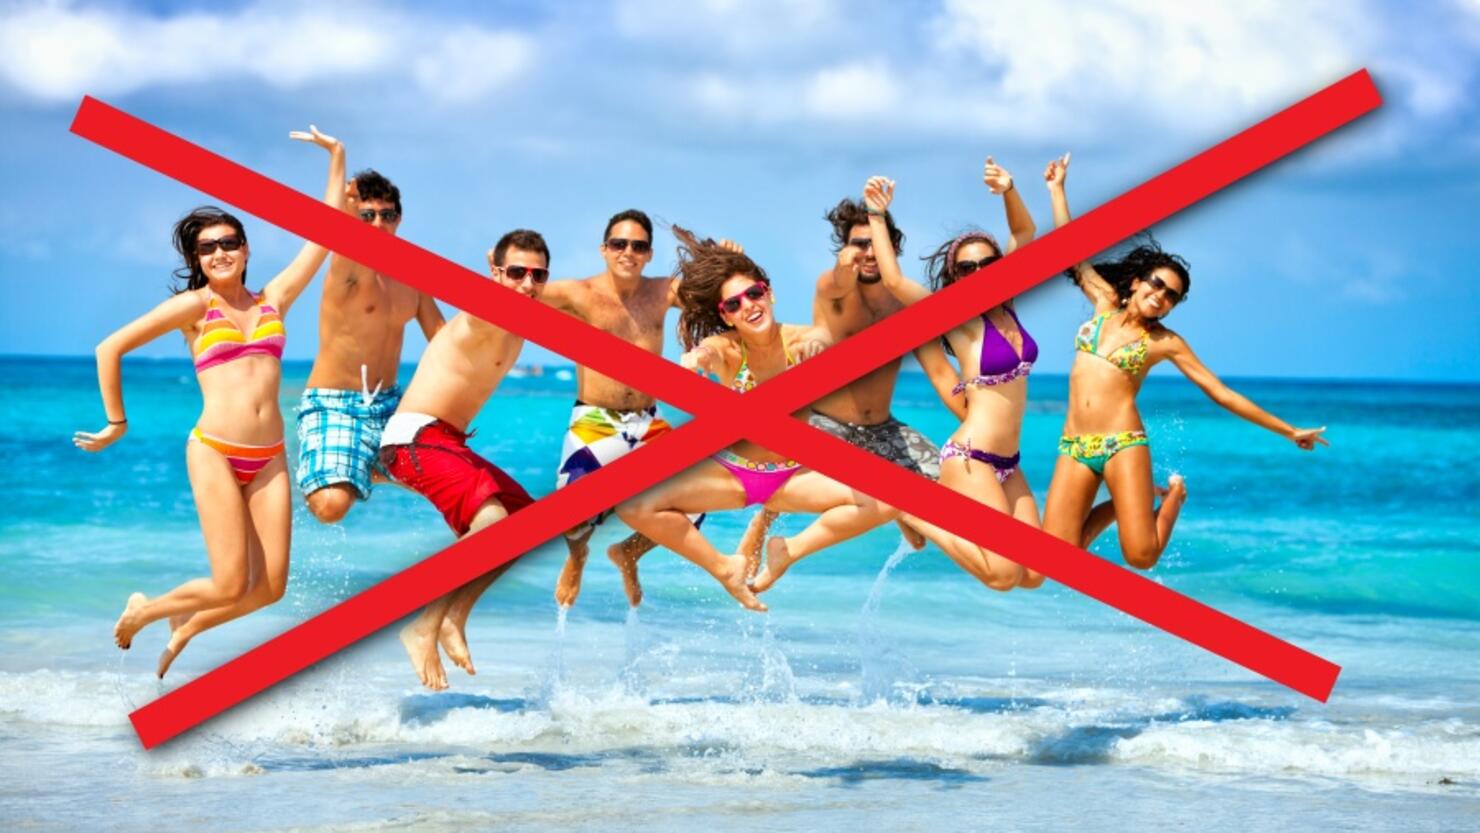 See Why The University Of Utah Canceled This Year's Spring Break iHeart